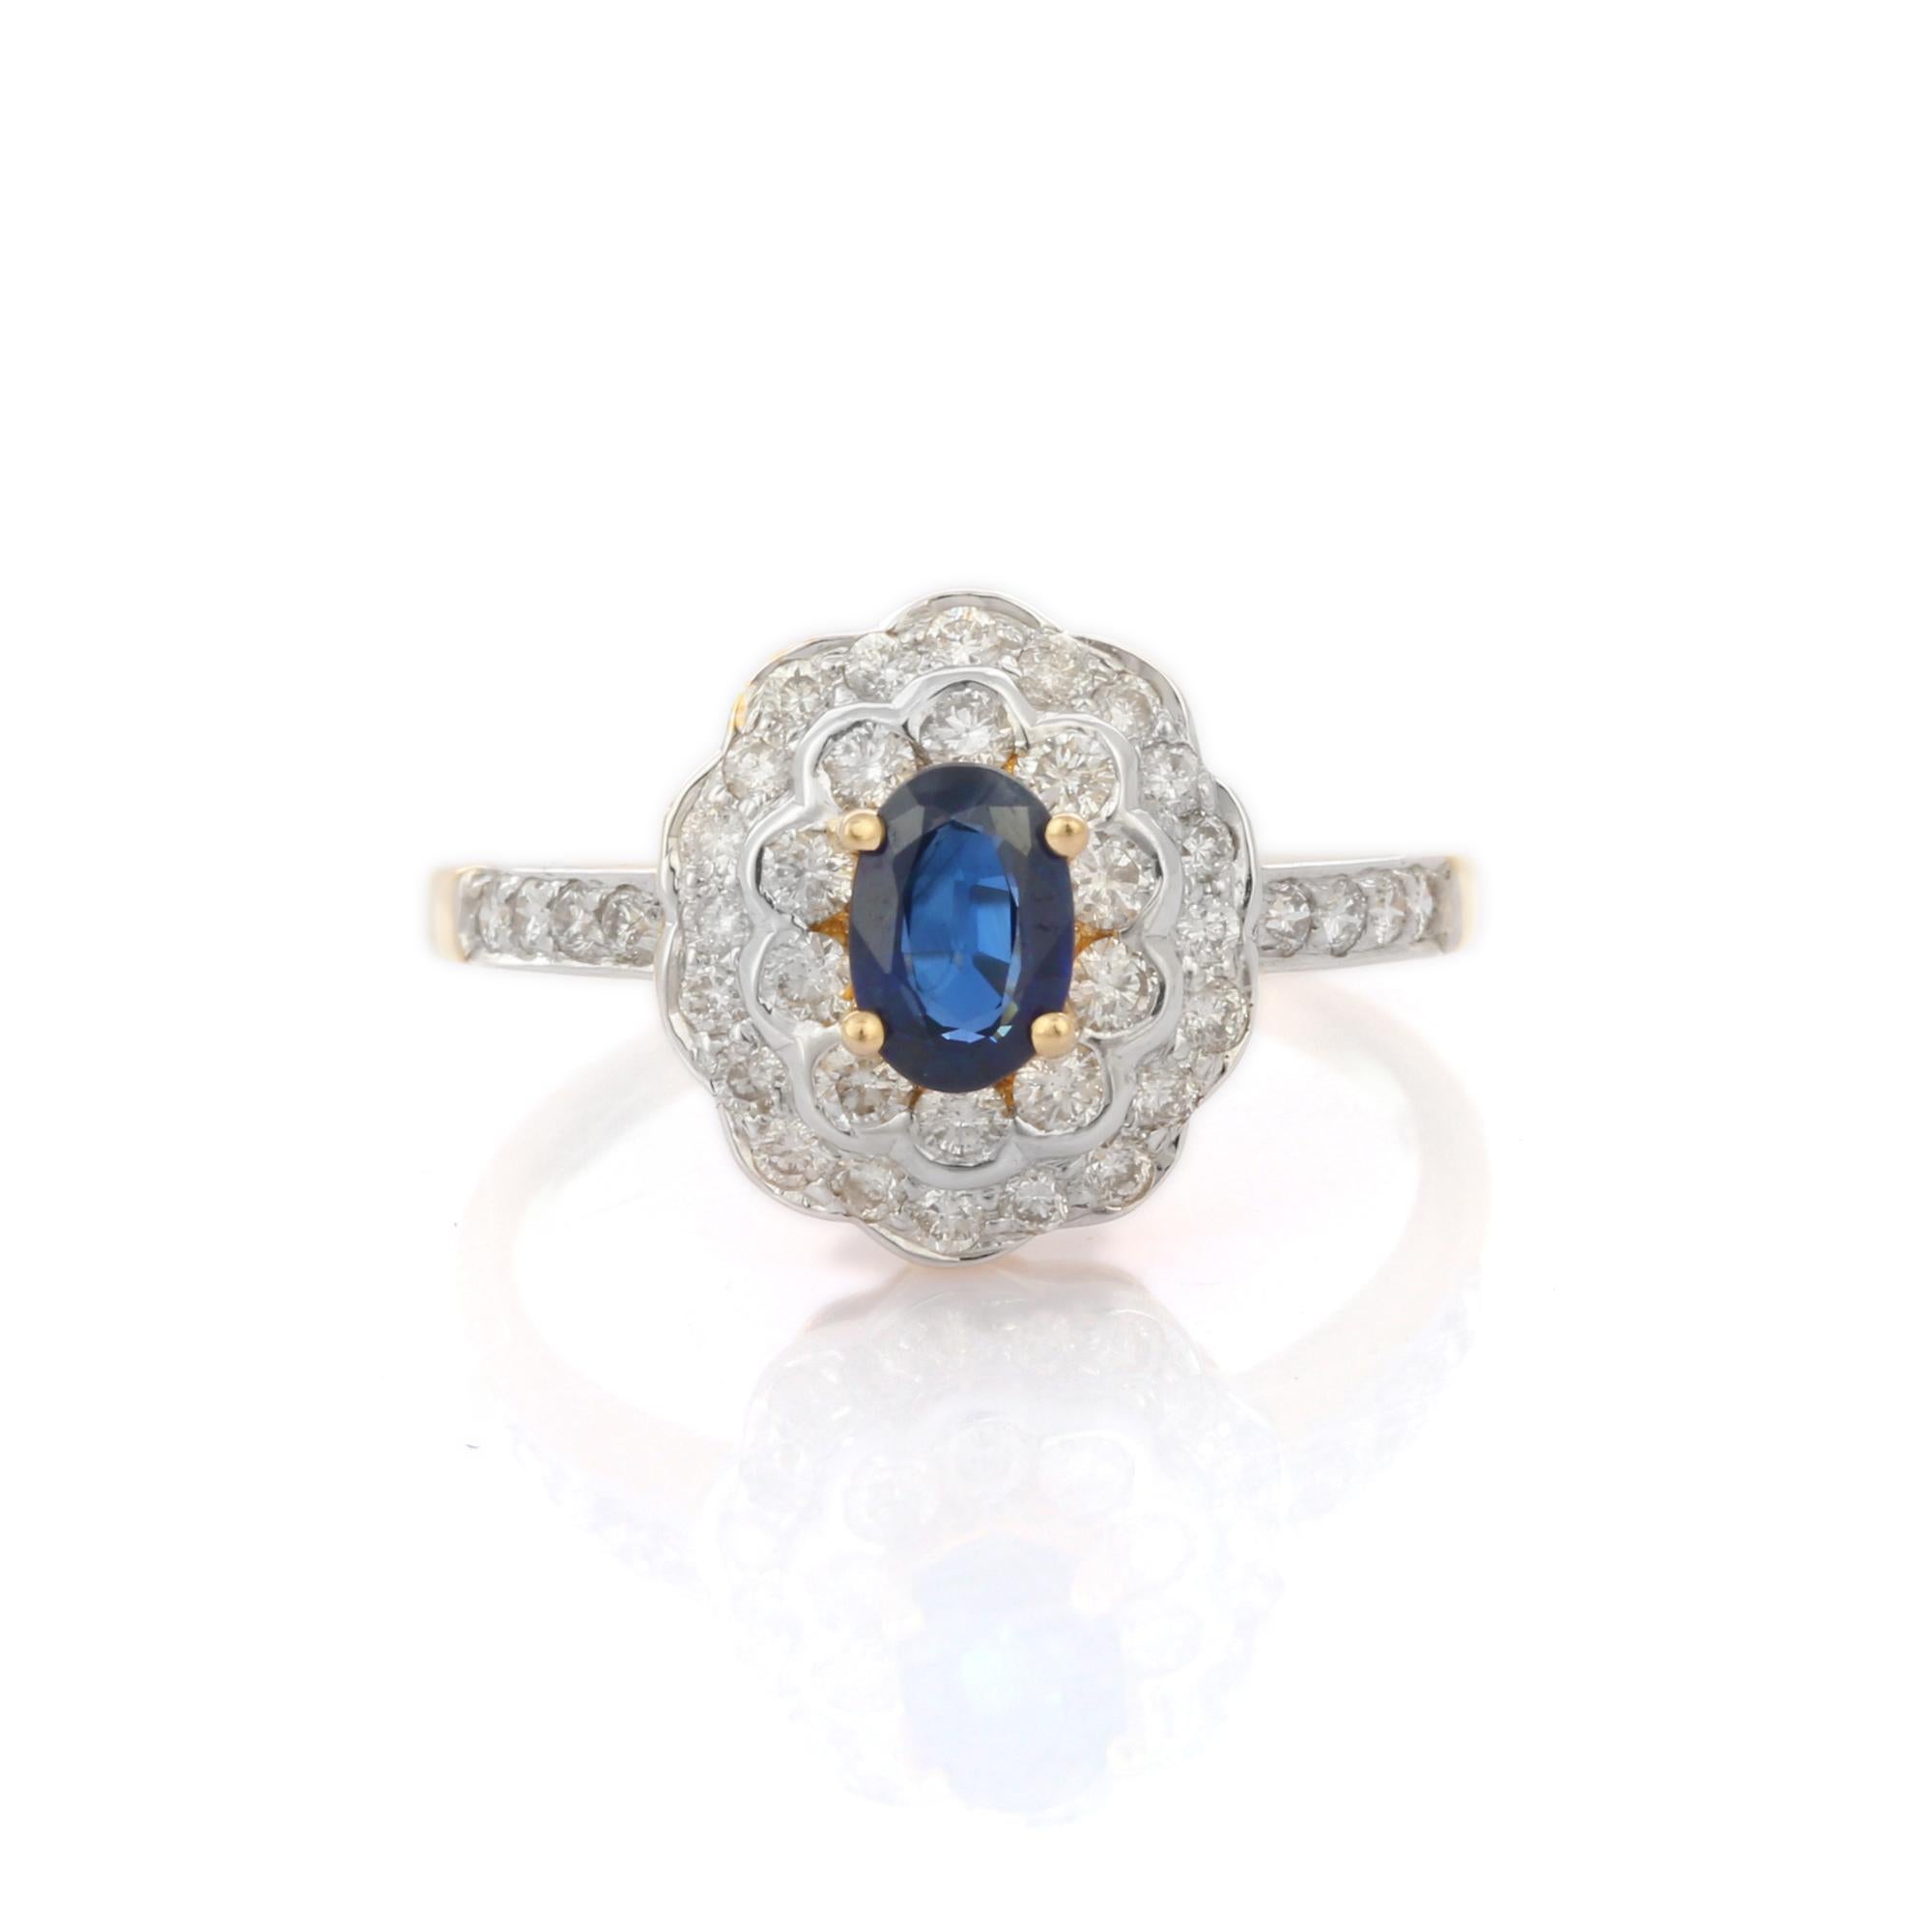 For Sale:  Big Floral Blue Sapphire Cocktail Ring with Inlaid Diamonds in 18K Yellow Gold 2